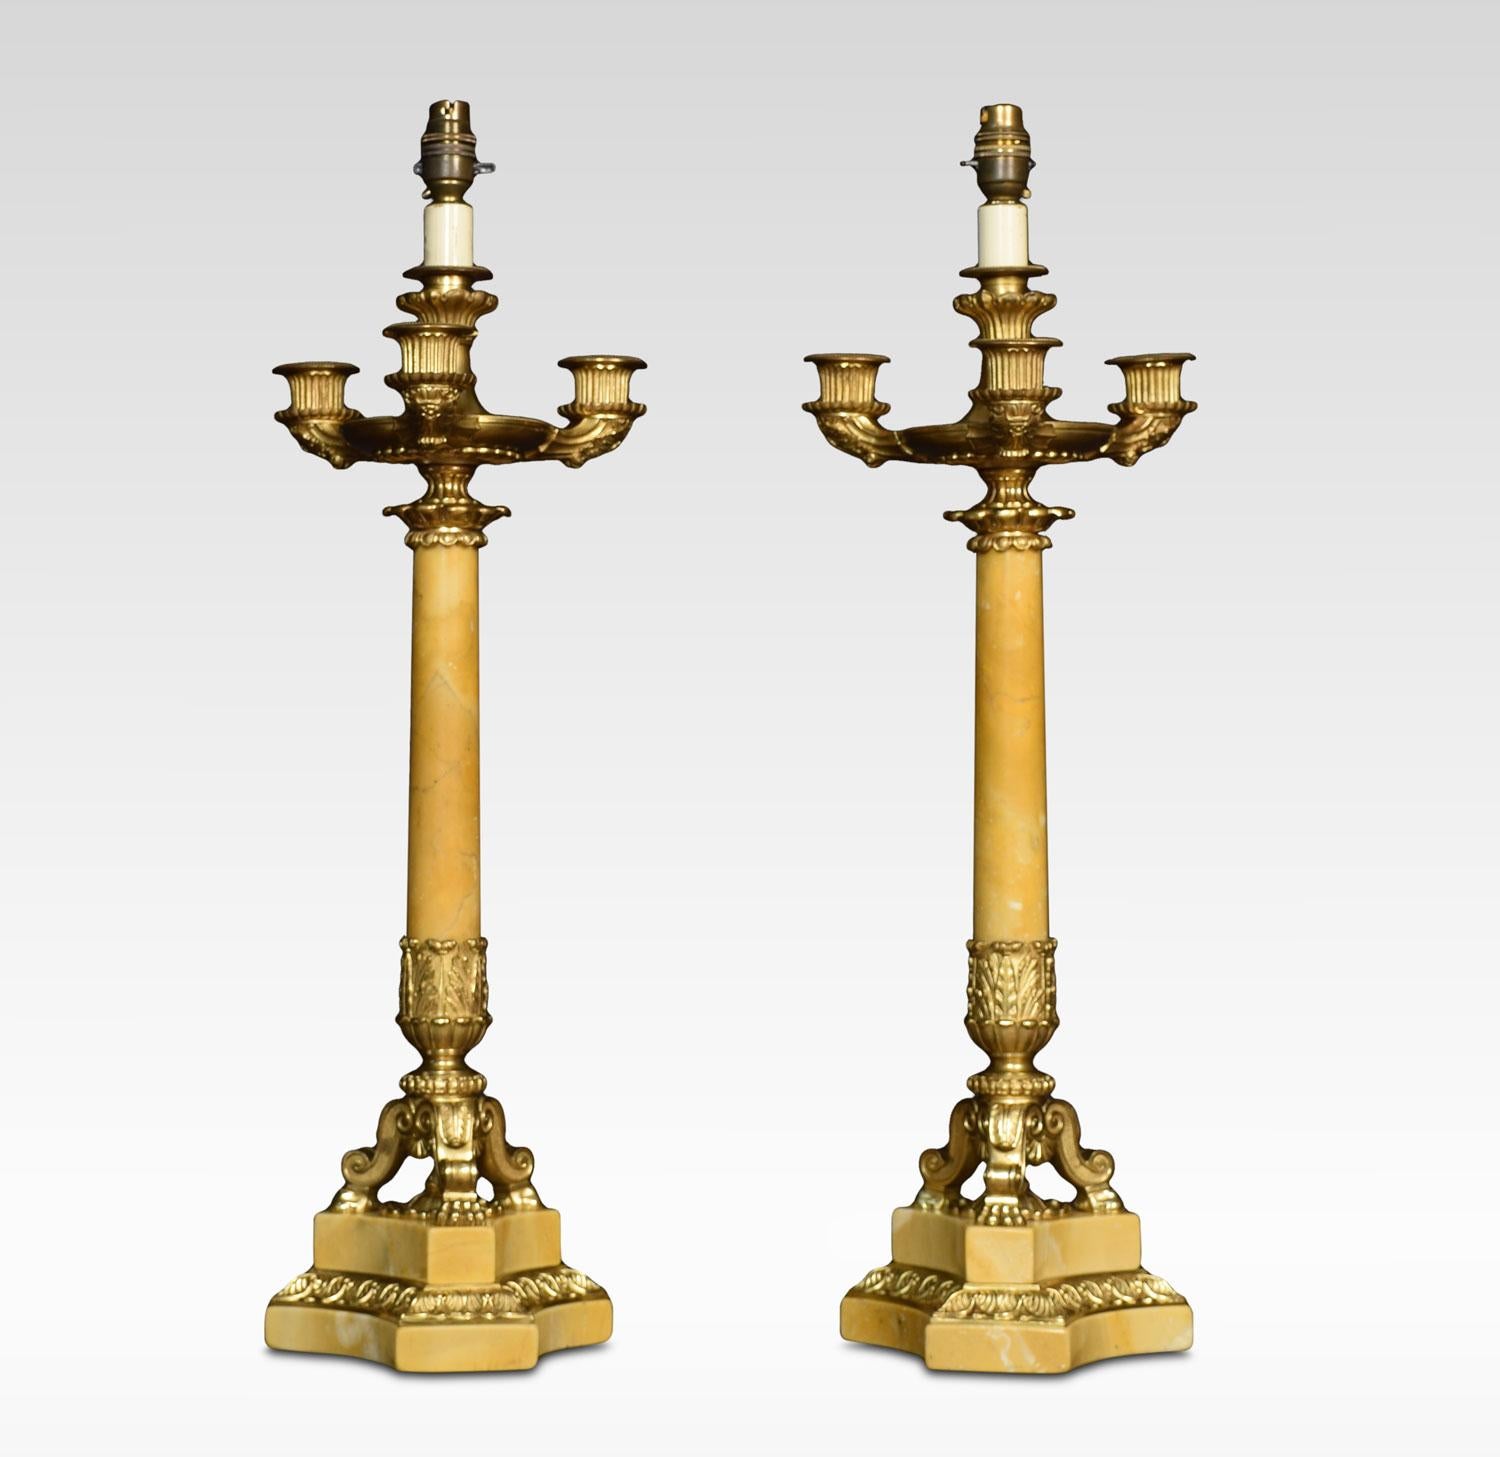 Large pair of Sienna marble and gilt metal lamps, each with a central fluted column surmounted by a lamp supporting three further ornate branches of sconces, all raised upon leaf capped scrolling legs terminating in stepped bases. Together with